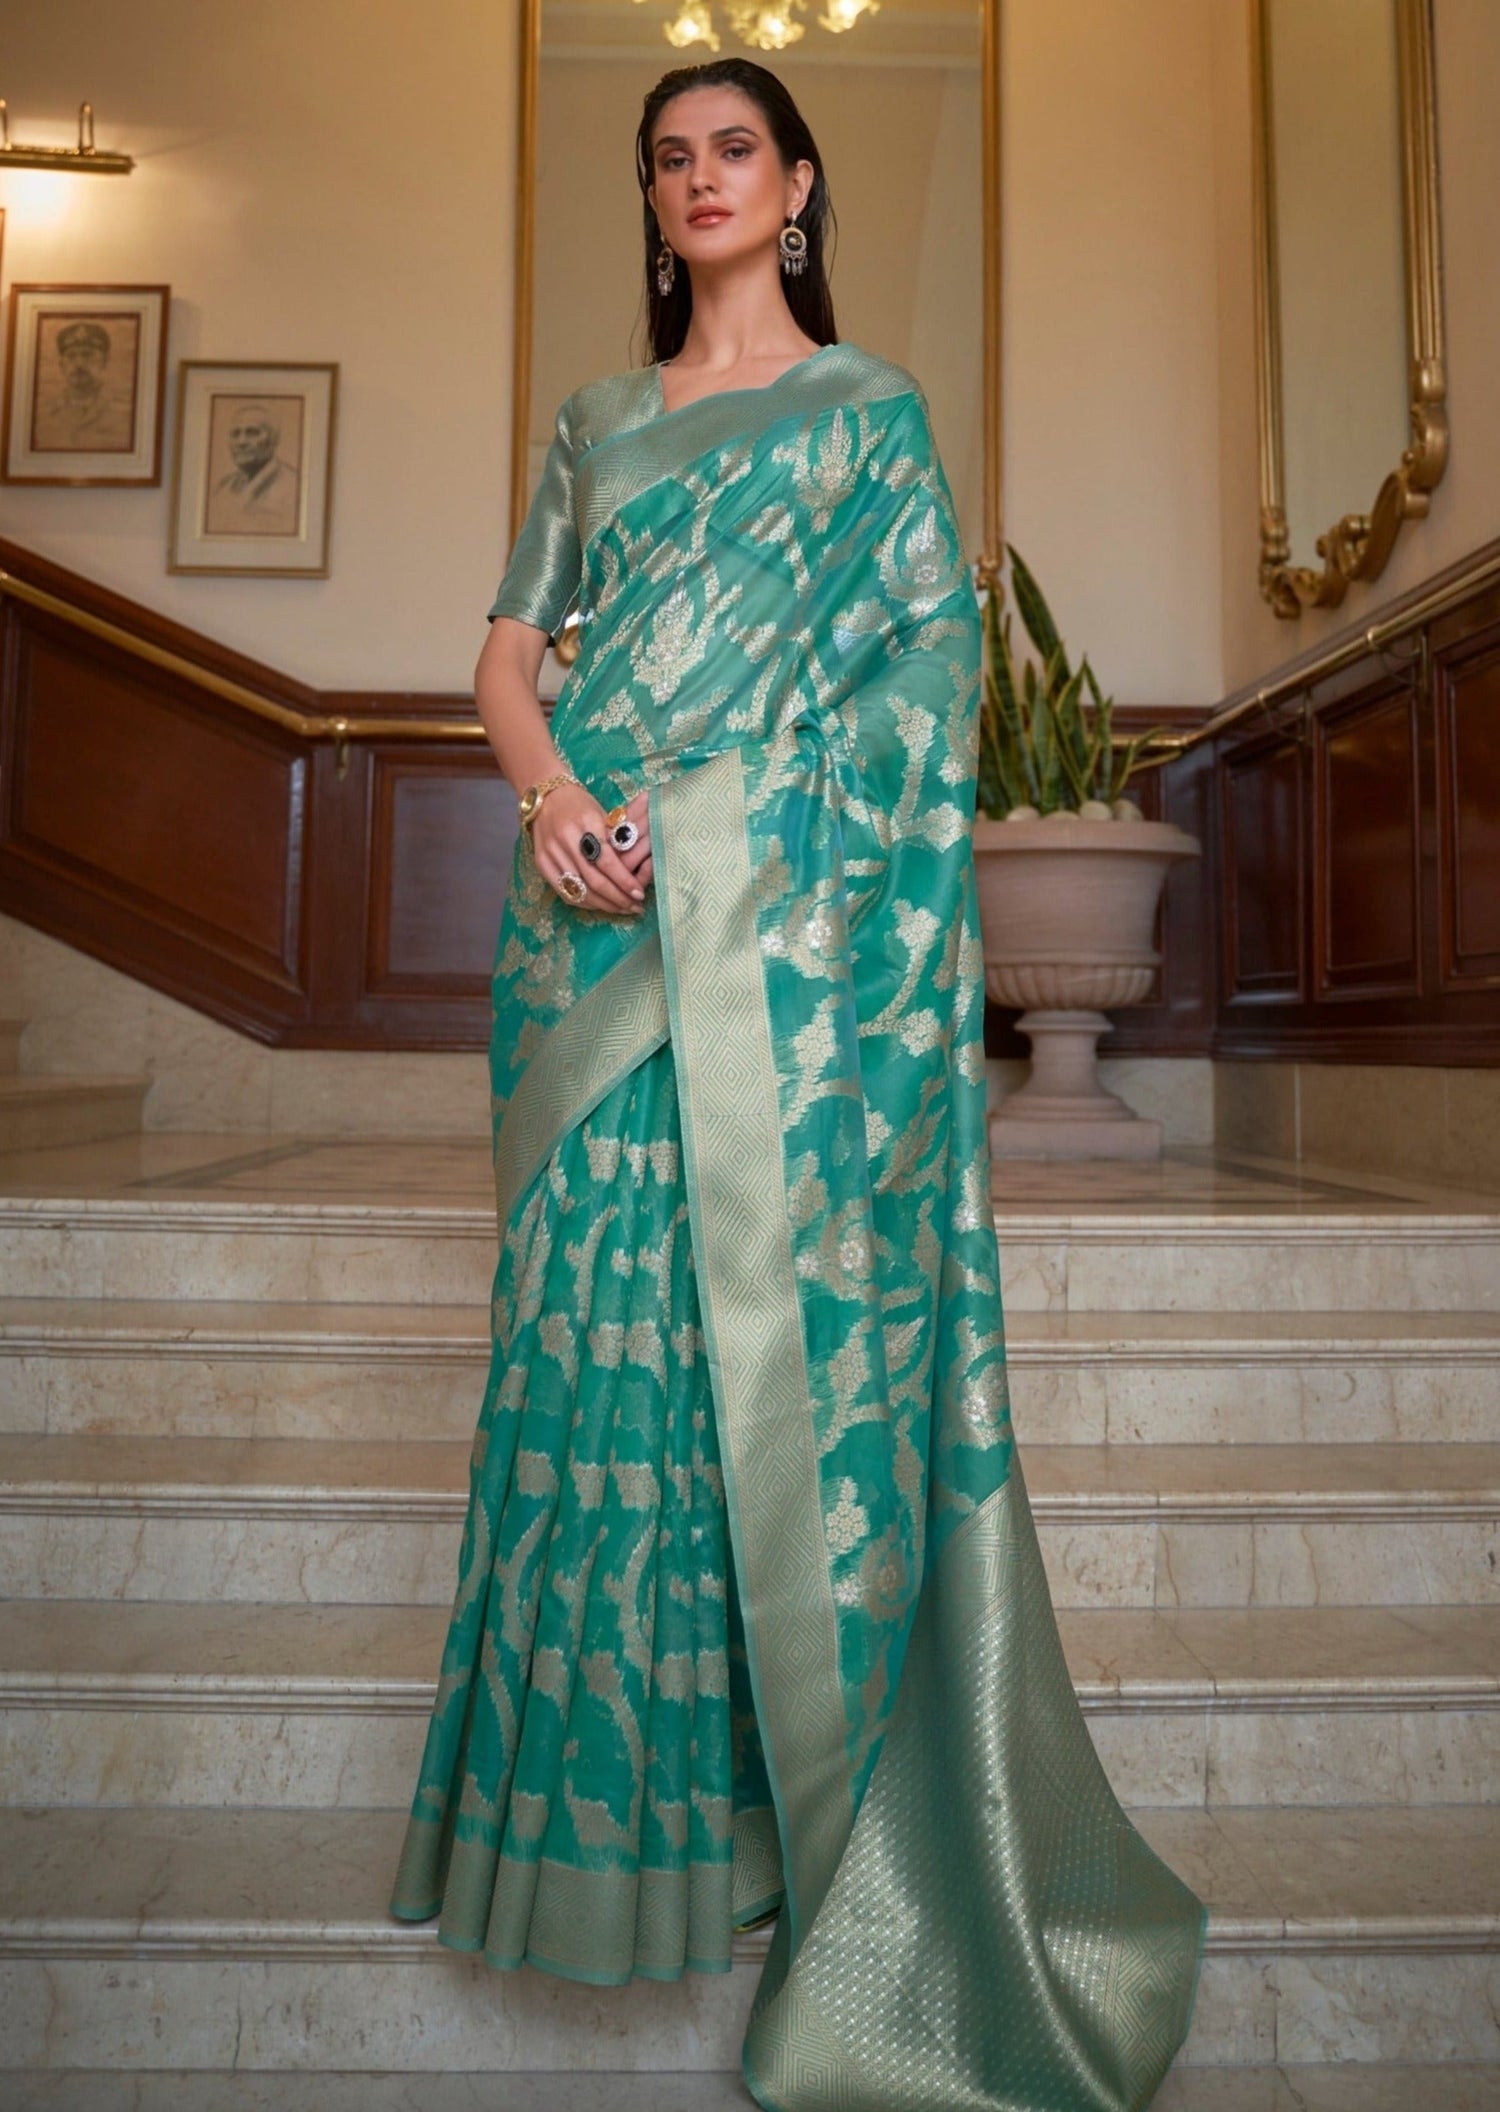 Woman in green color Banarasi Organza saree standing on white marble stairs